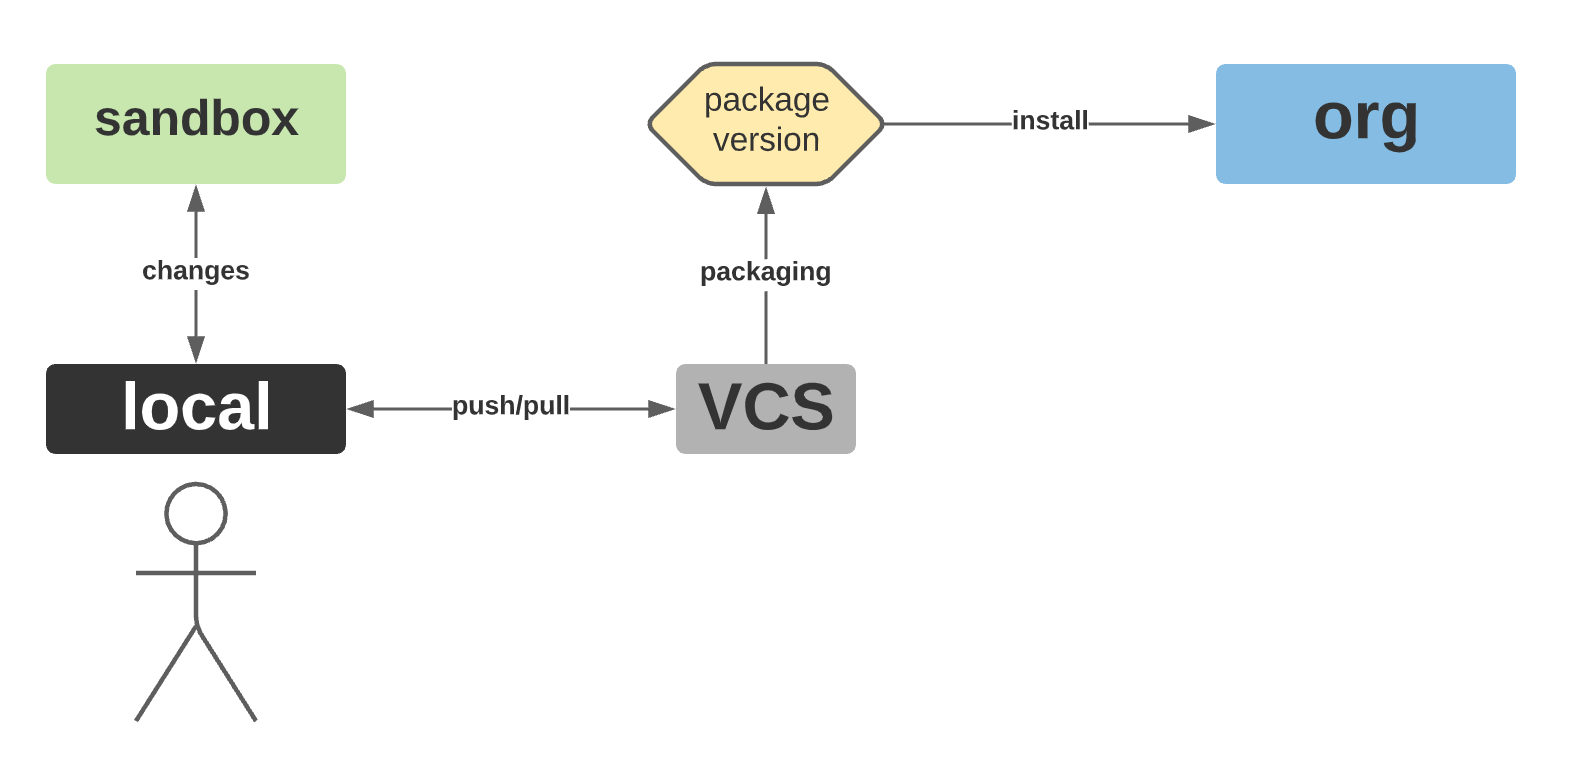 Image showing development flow with org-dependent packages.